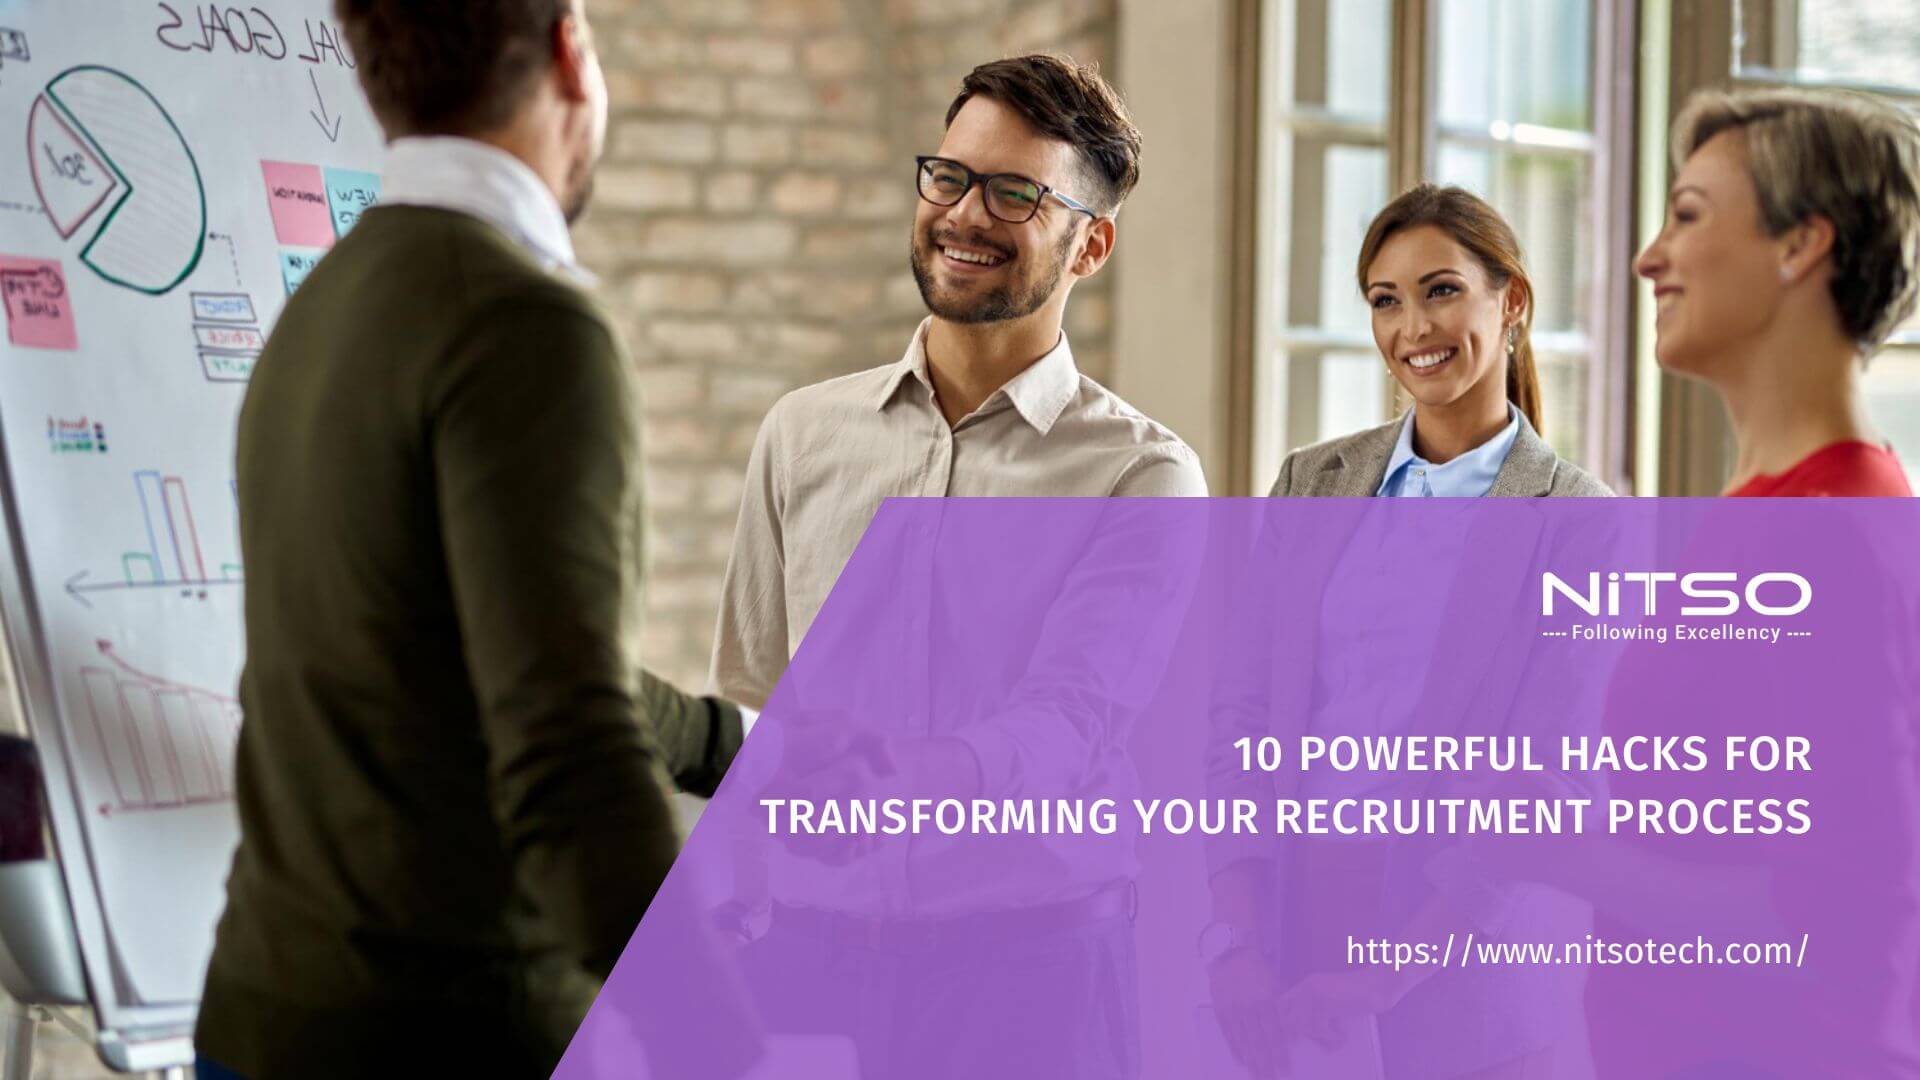 10 Powerful Hacks For Transforming Your Recruitment Process